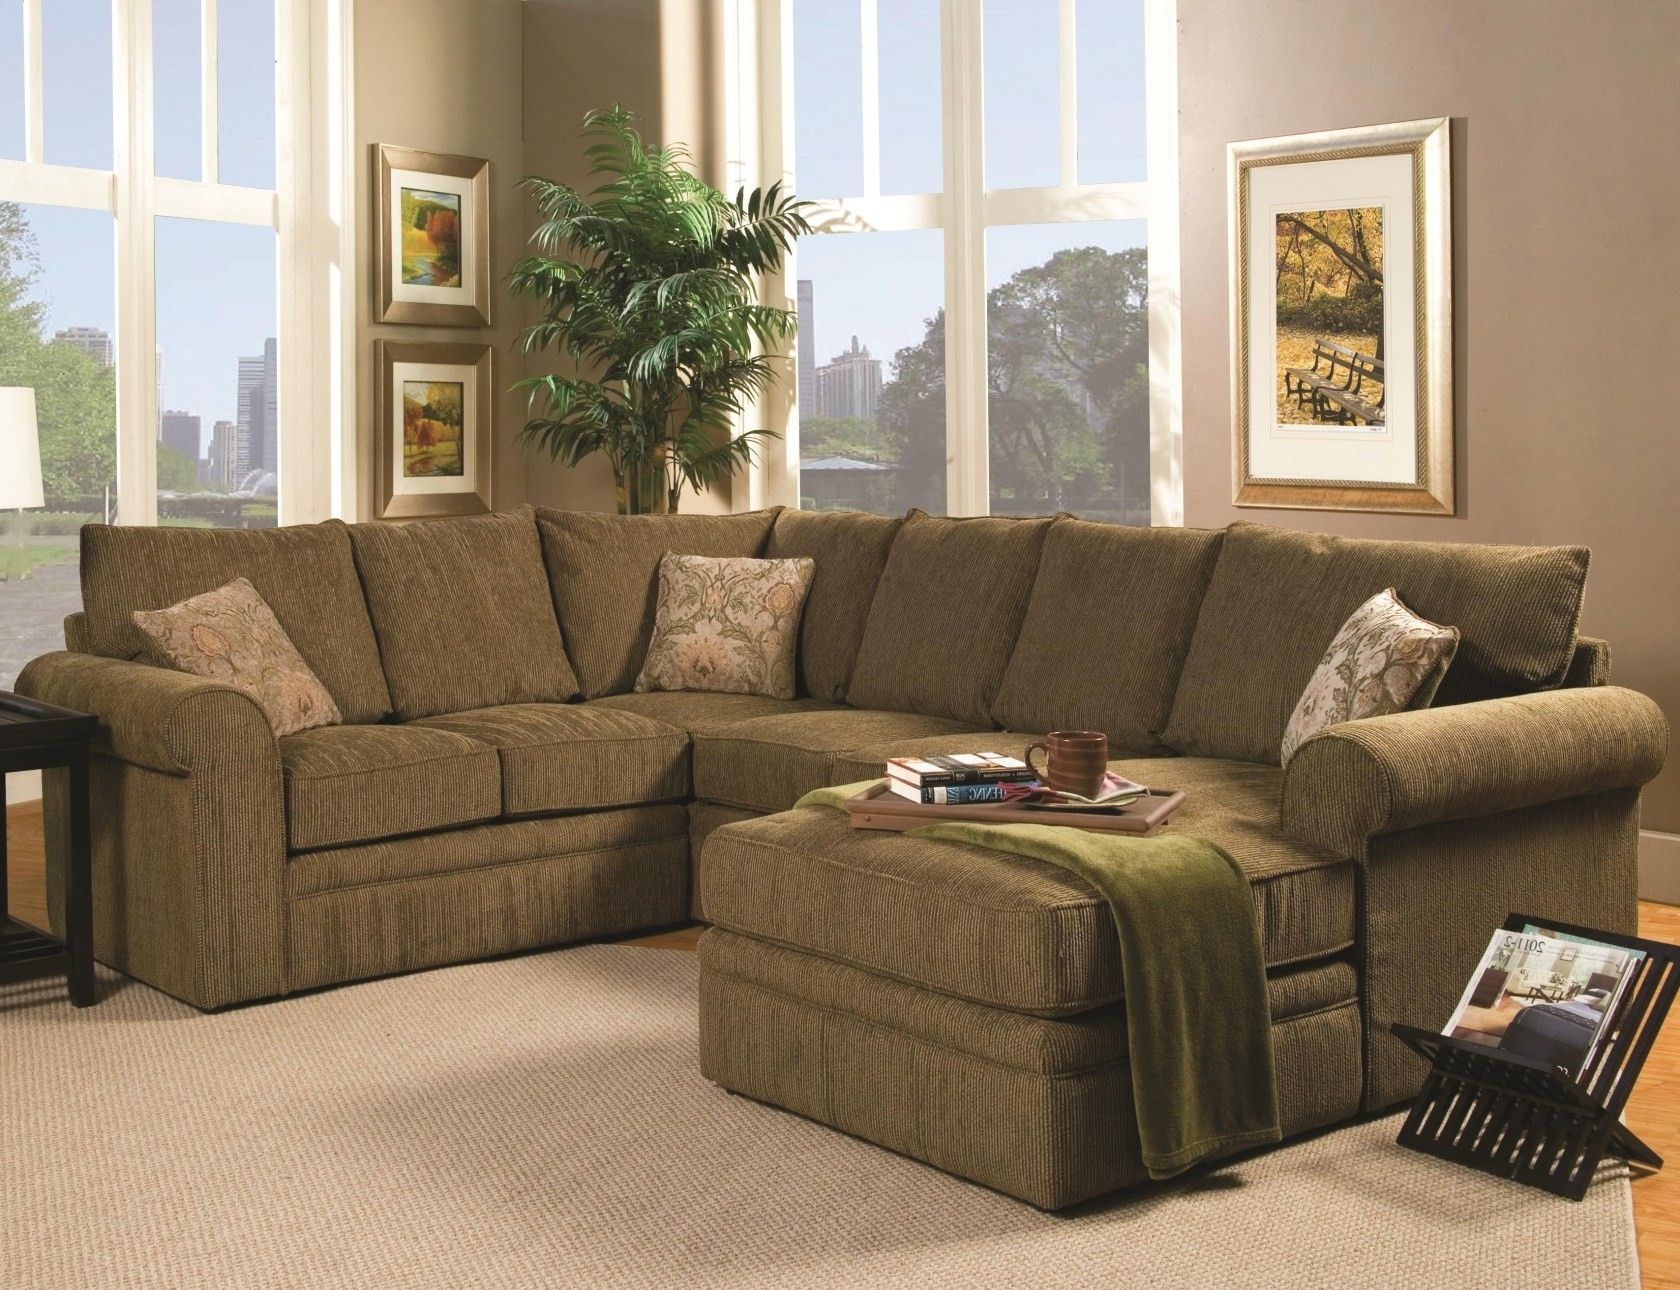 Most Comfortable Sectional Sofa With Chaise Throughout Well Known Comfortable Sectional Sofas (View 10 of 15)